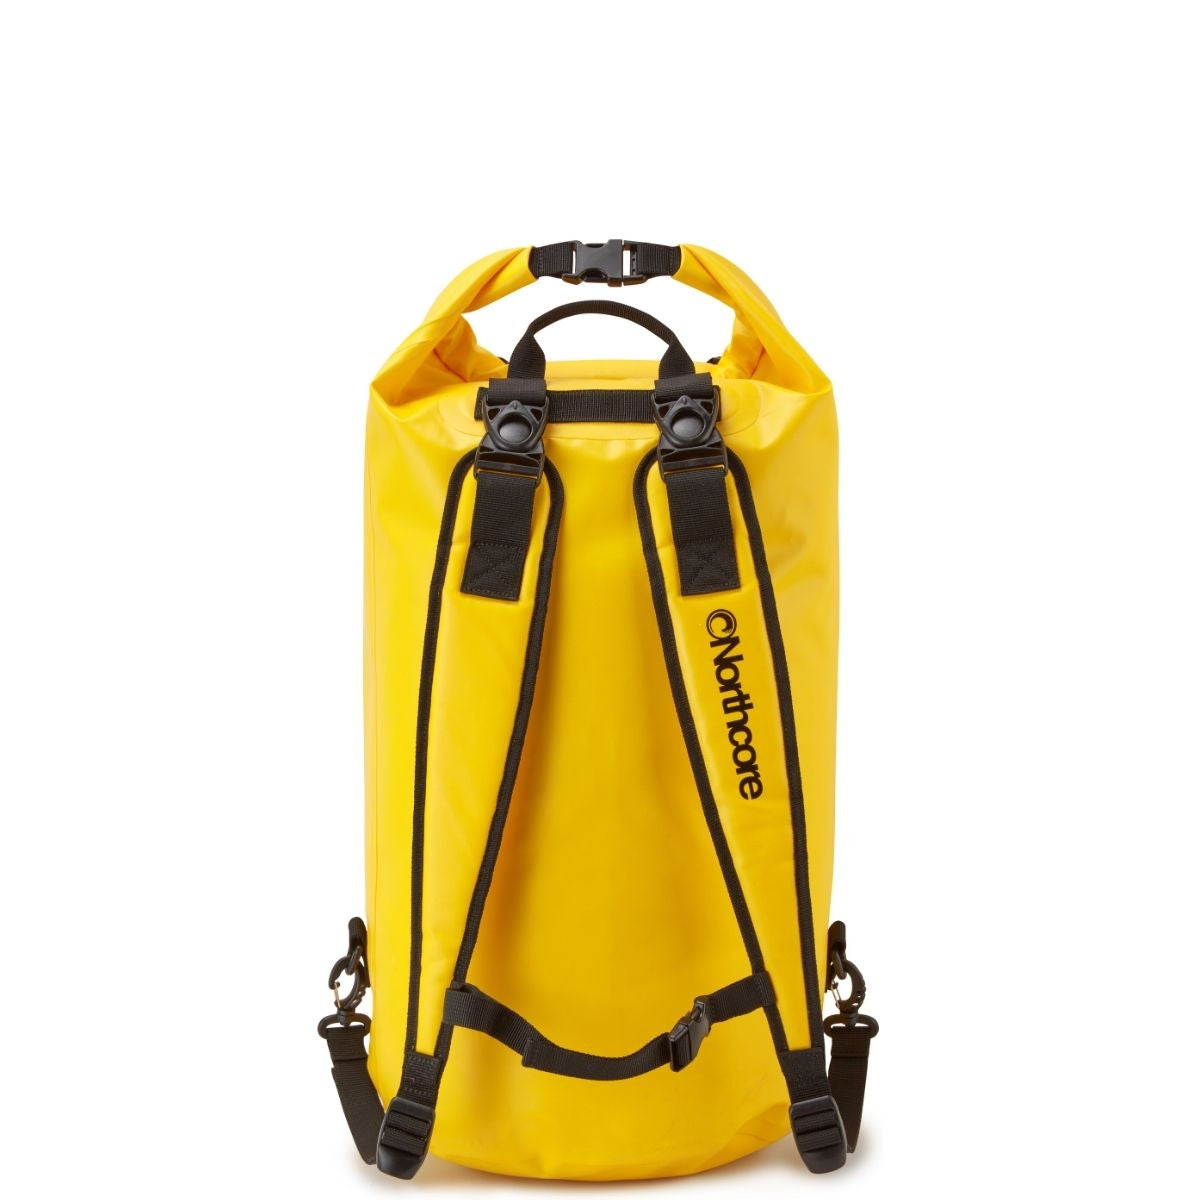 Northcore Waterproof Dry Bag Backpack Yellow 20l Back